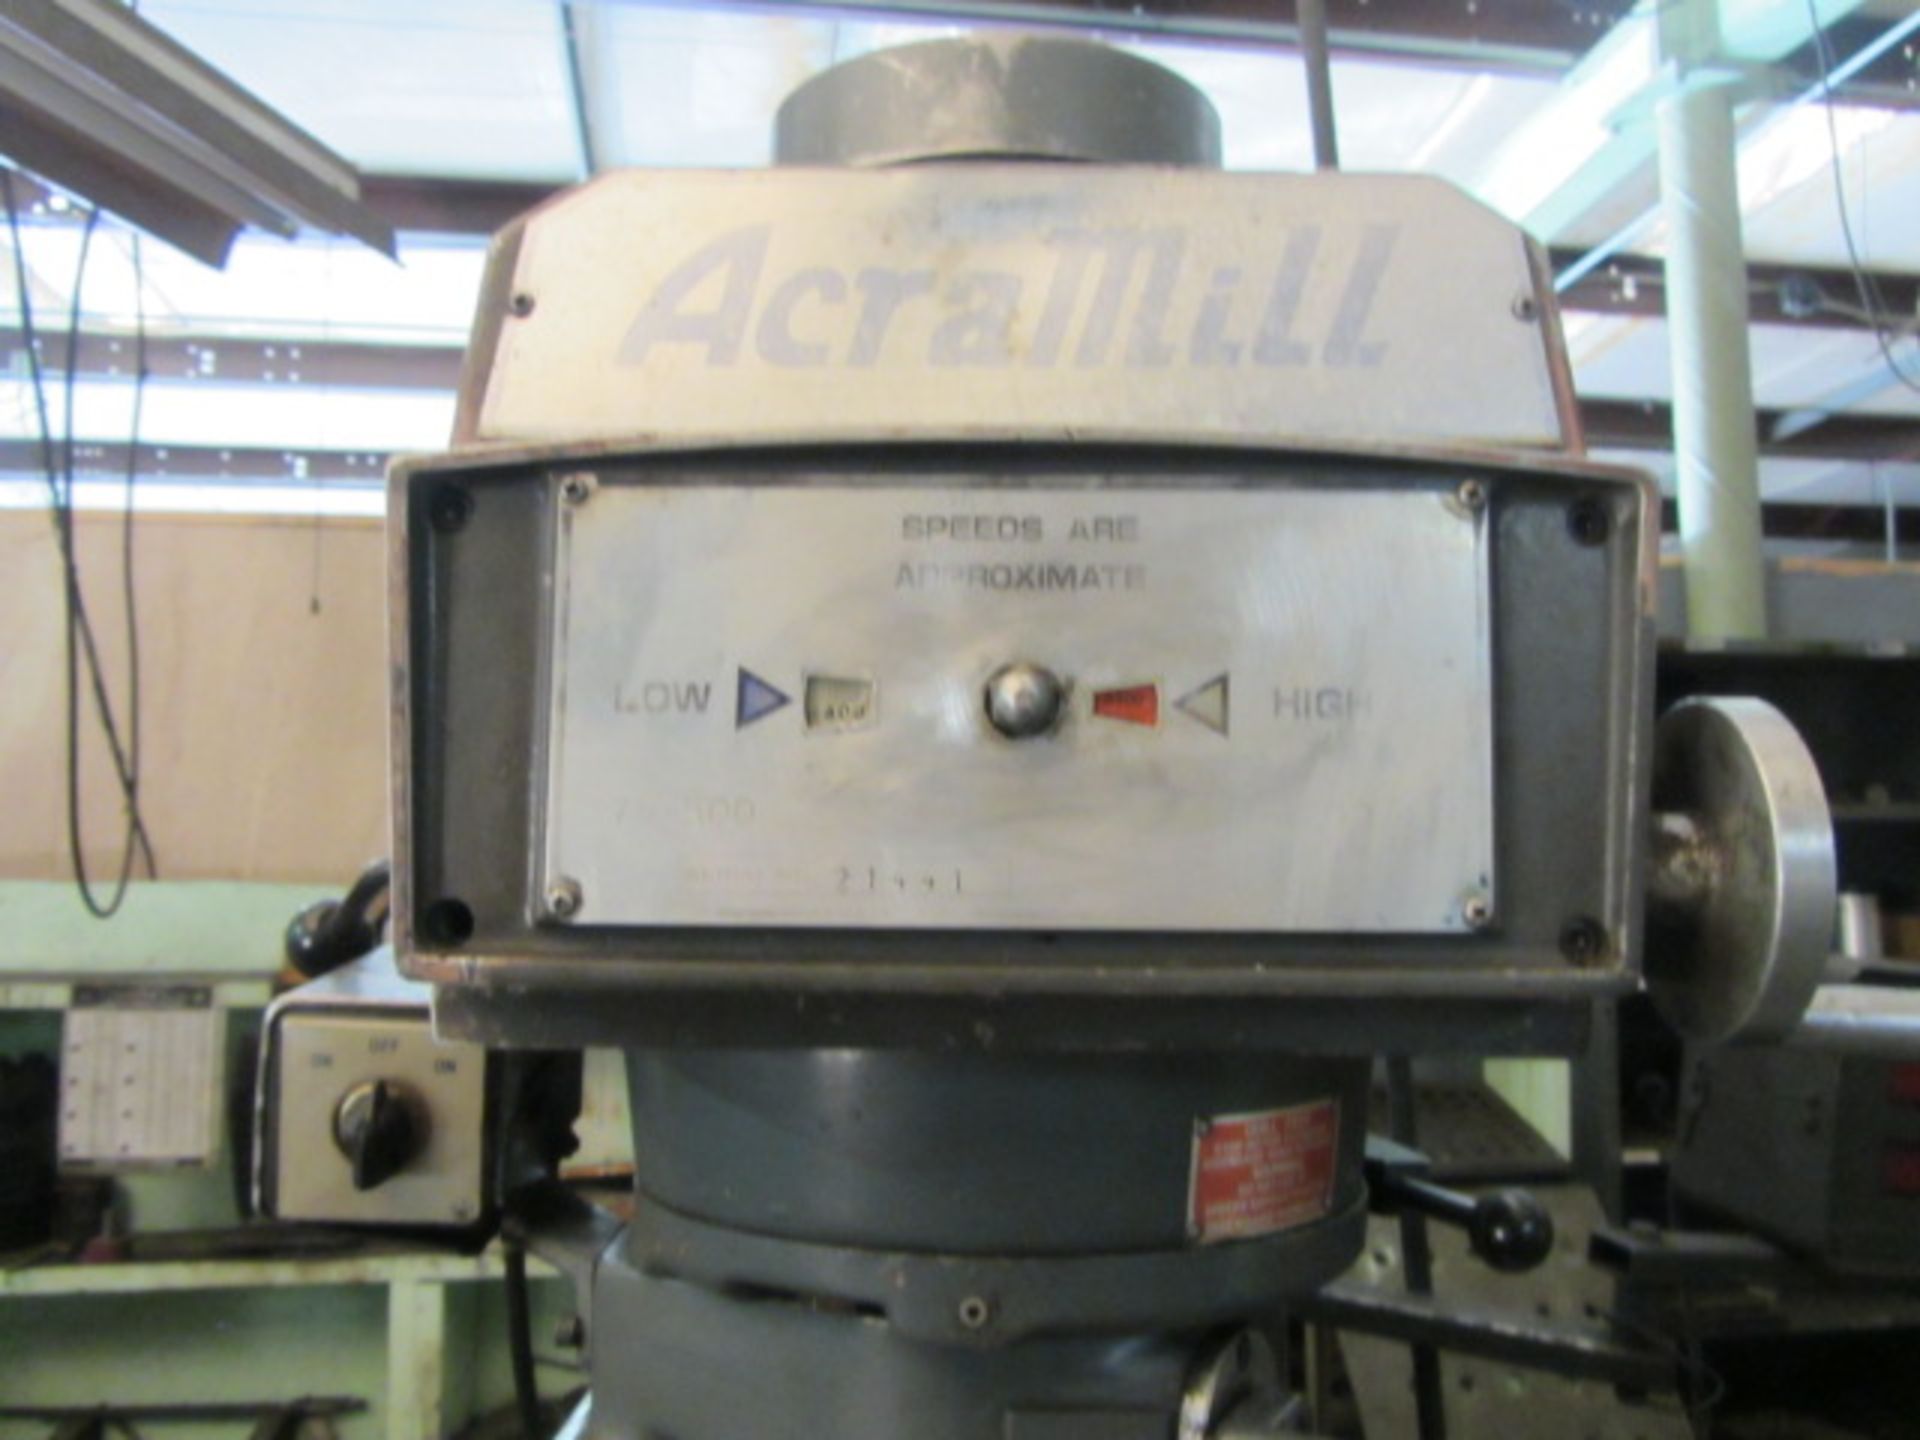 Acra Variable Speed Vertical Milling Machine with 10'' x 50'' Table, R-8 Variable Spindle Speeds - Image 4 of 6